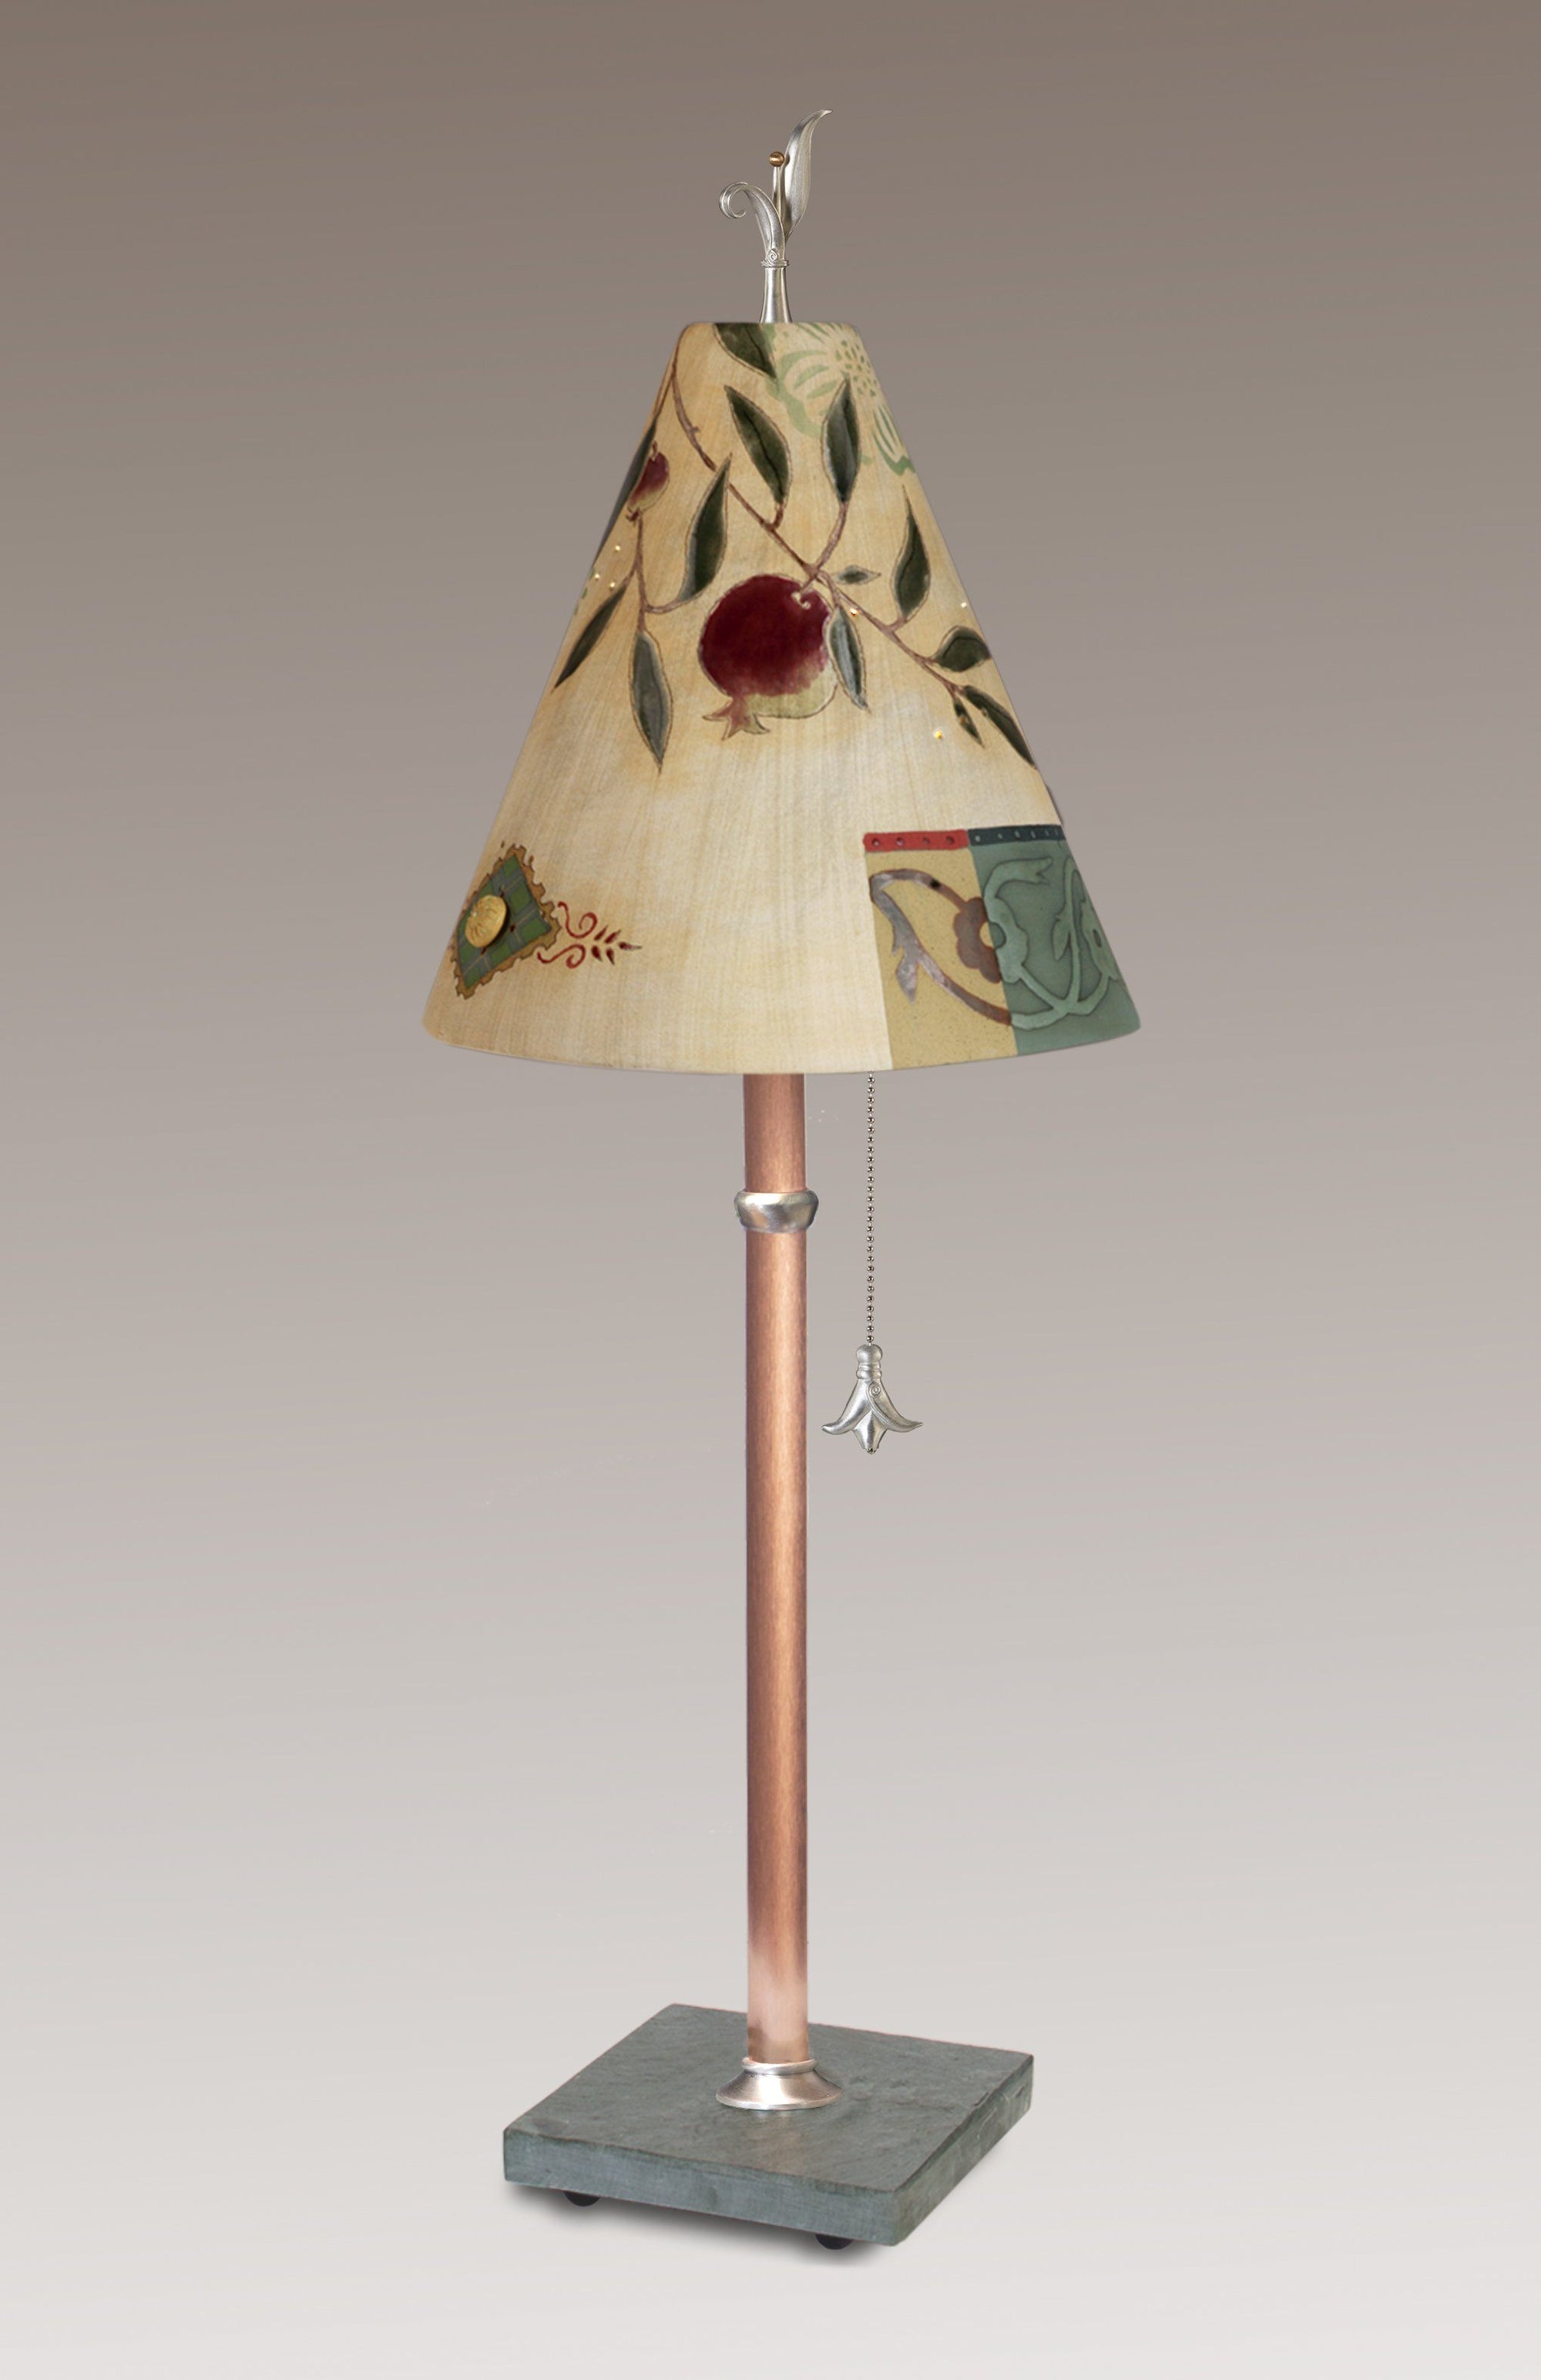 Janna Ugone & Co Table Lamps Copper Table Lamp with Small Conical Ceramic Shade in Pomegranate Ribbon